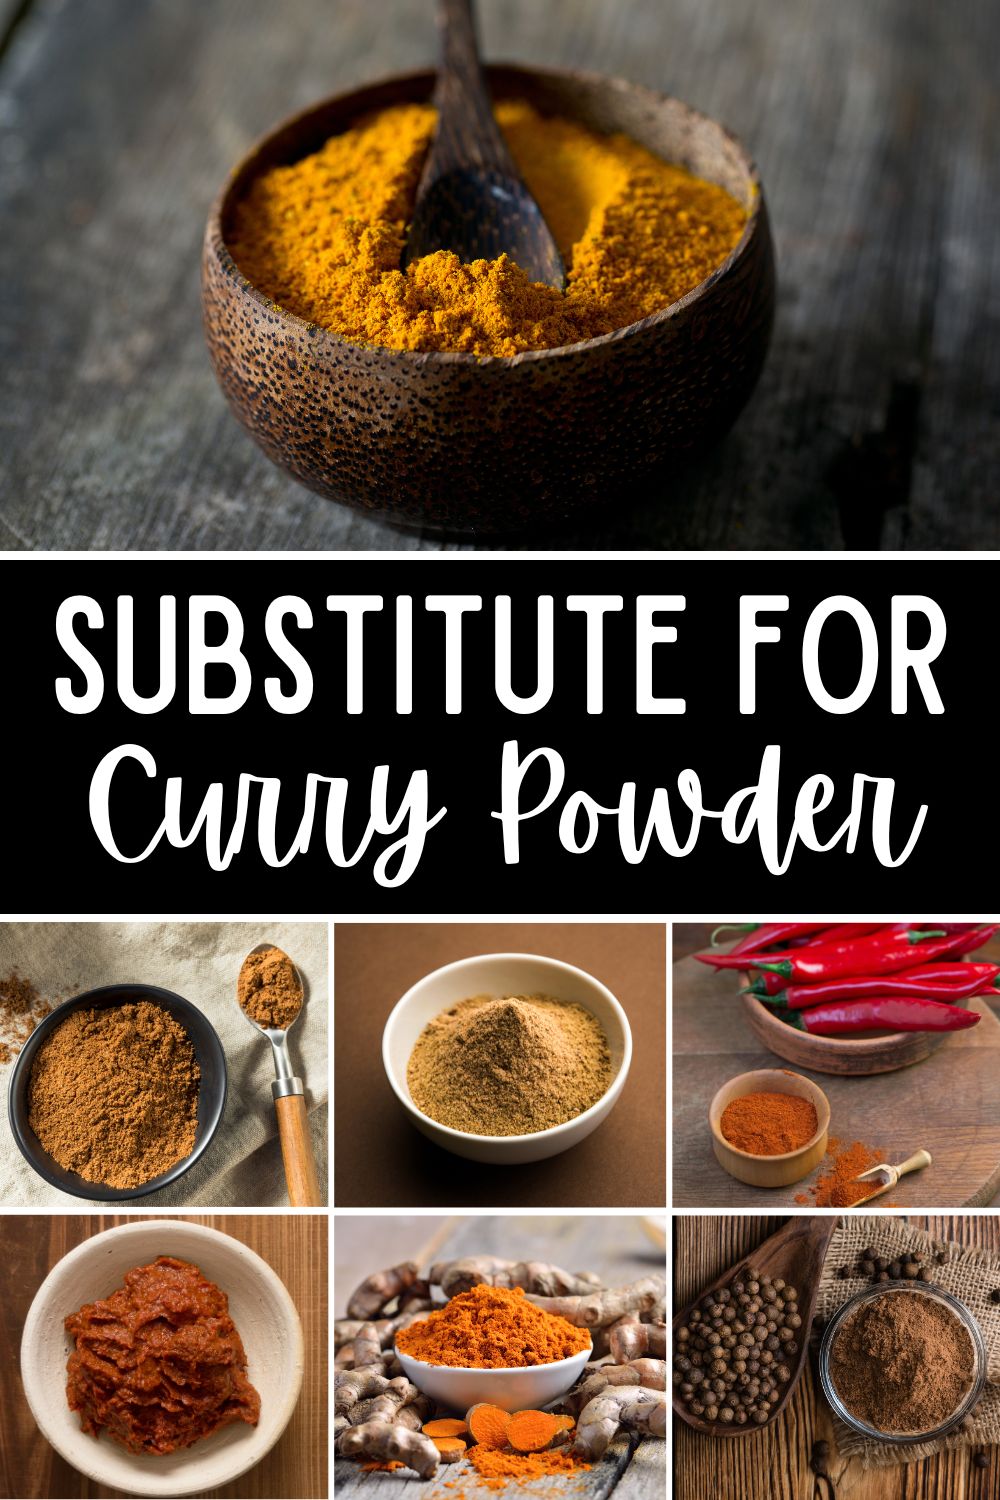 A collage of spices with the text alternative for curry powder.